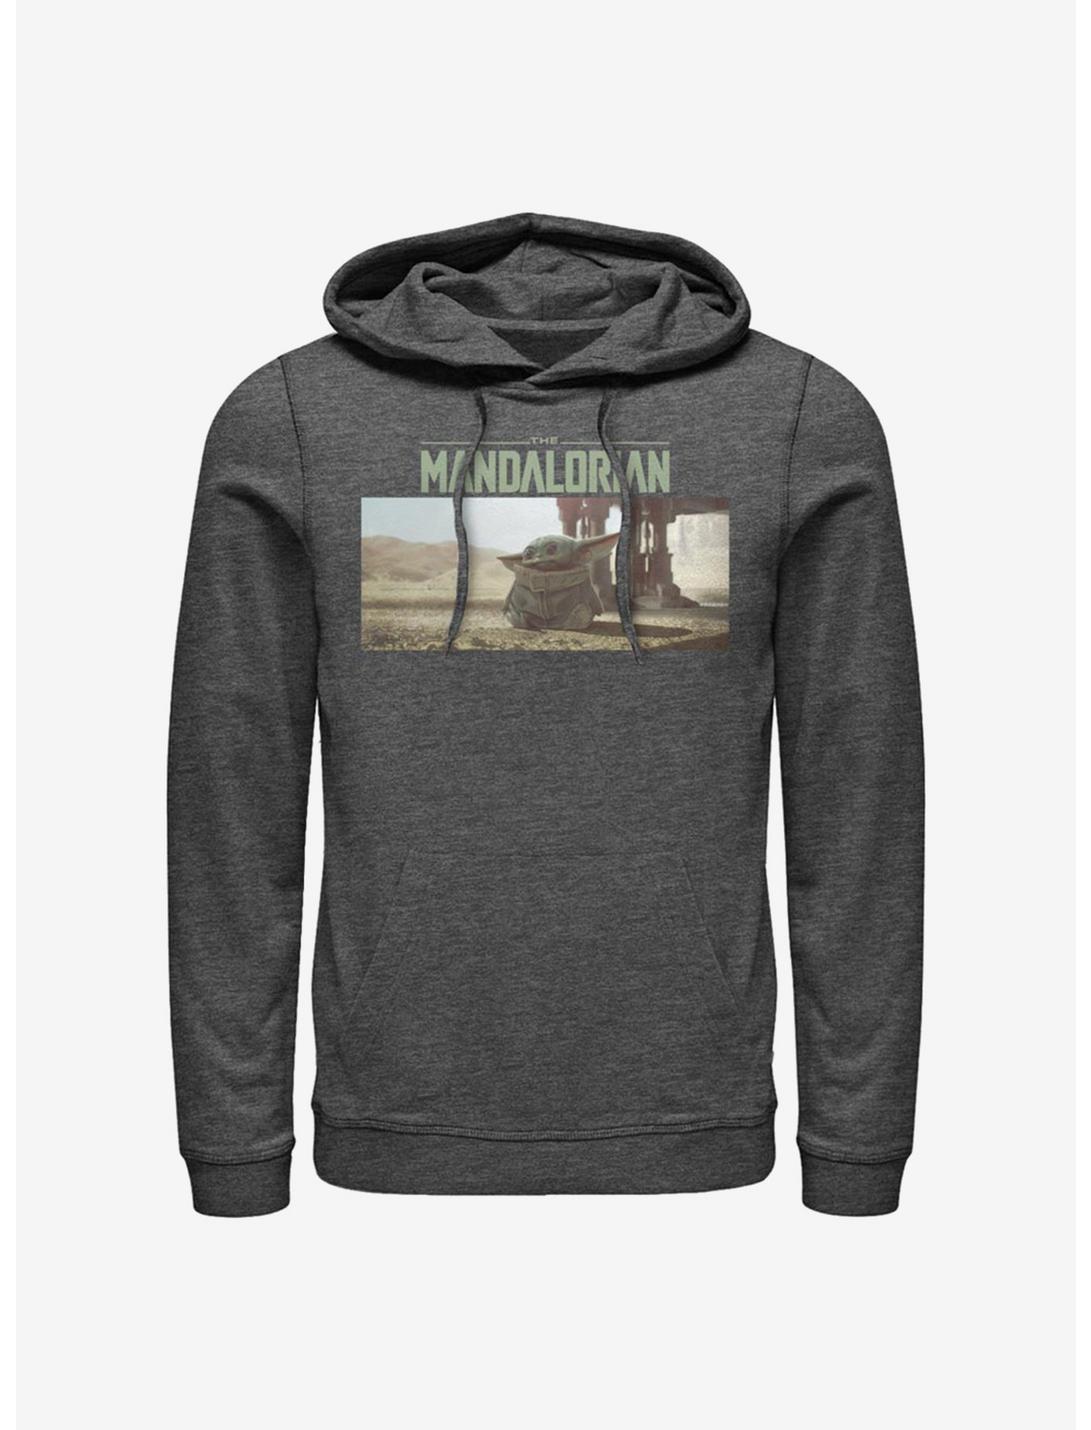 Star Wars The Mandalorian The Child Still Looking Hoodie, CHAR HTR, hi-res